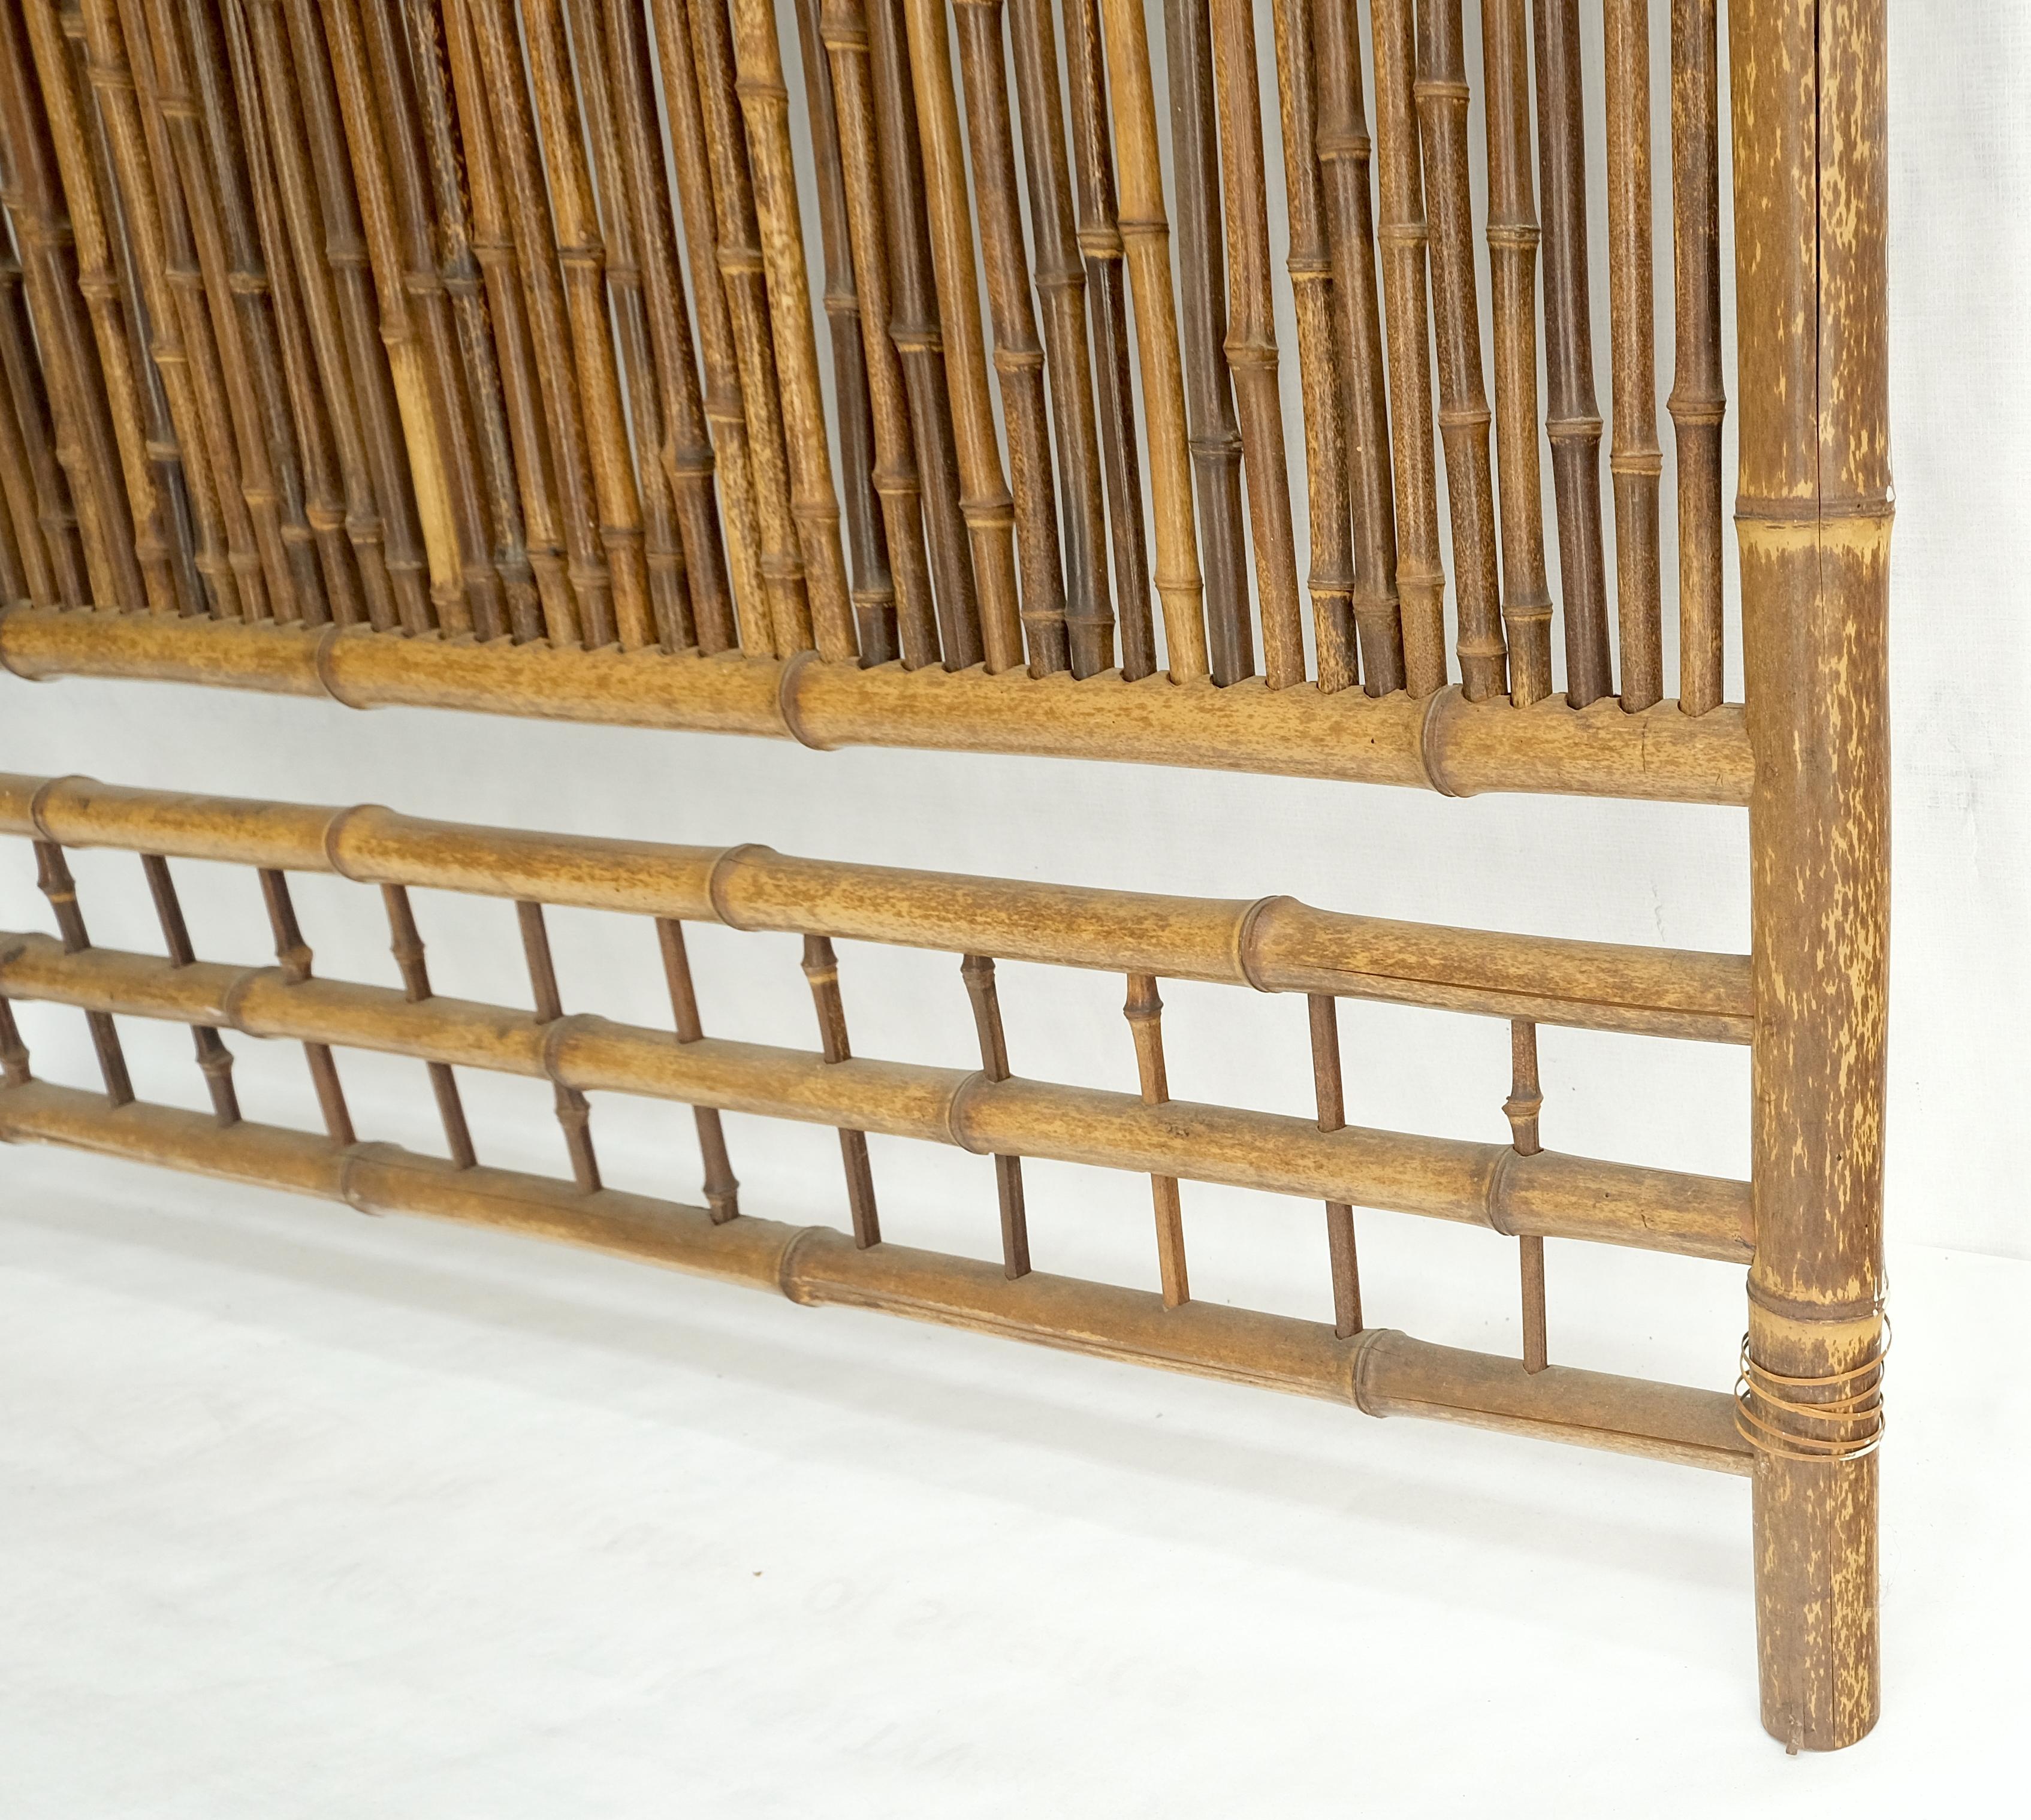 Pair of Japanese Modern Bamboo Room Dividers Screens Decorative Panels Wall Art For Sale 3